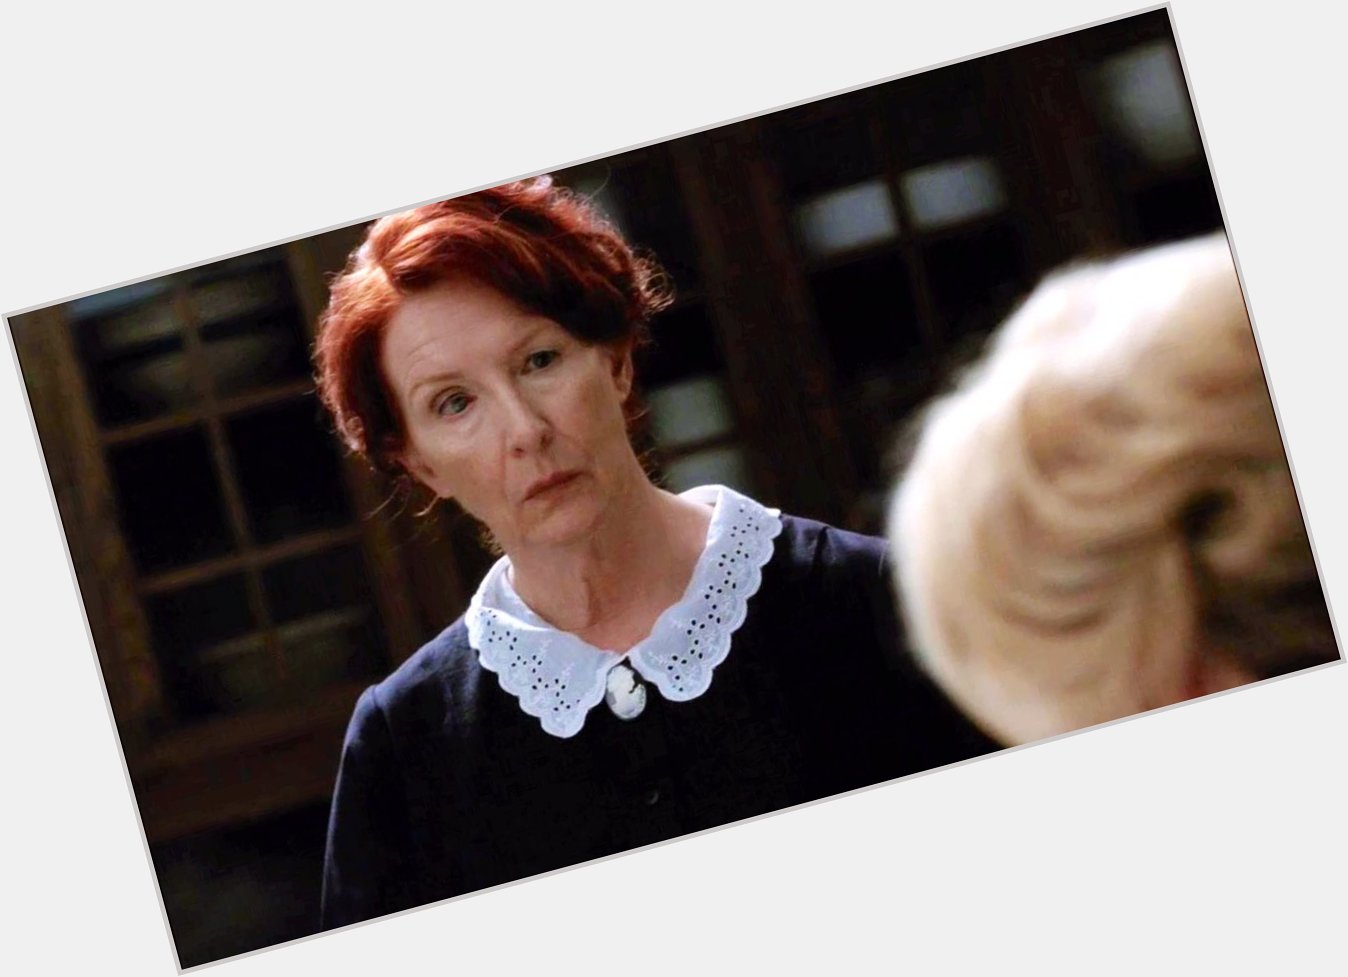 HAPPY BIRTHDAY TO ONE OF THE MOST TALENTED ACTRESSES I KNOW, FRANCES CONROY!  